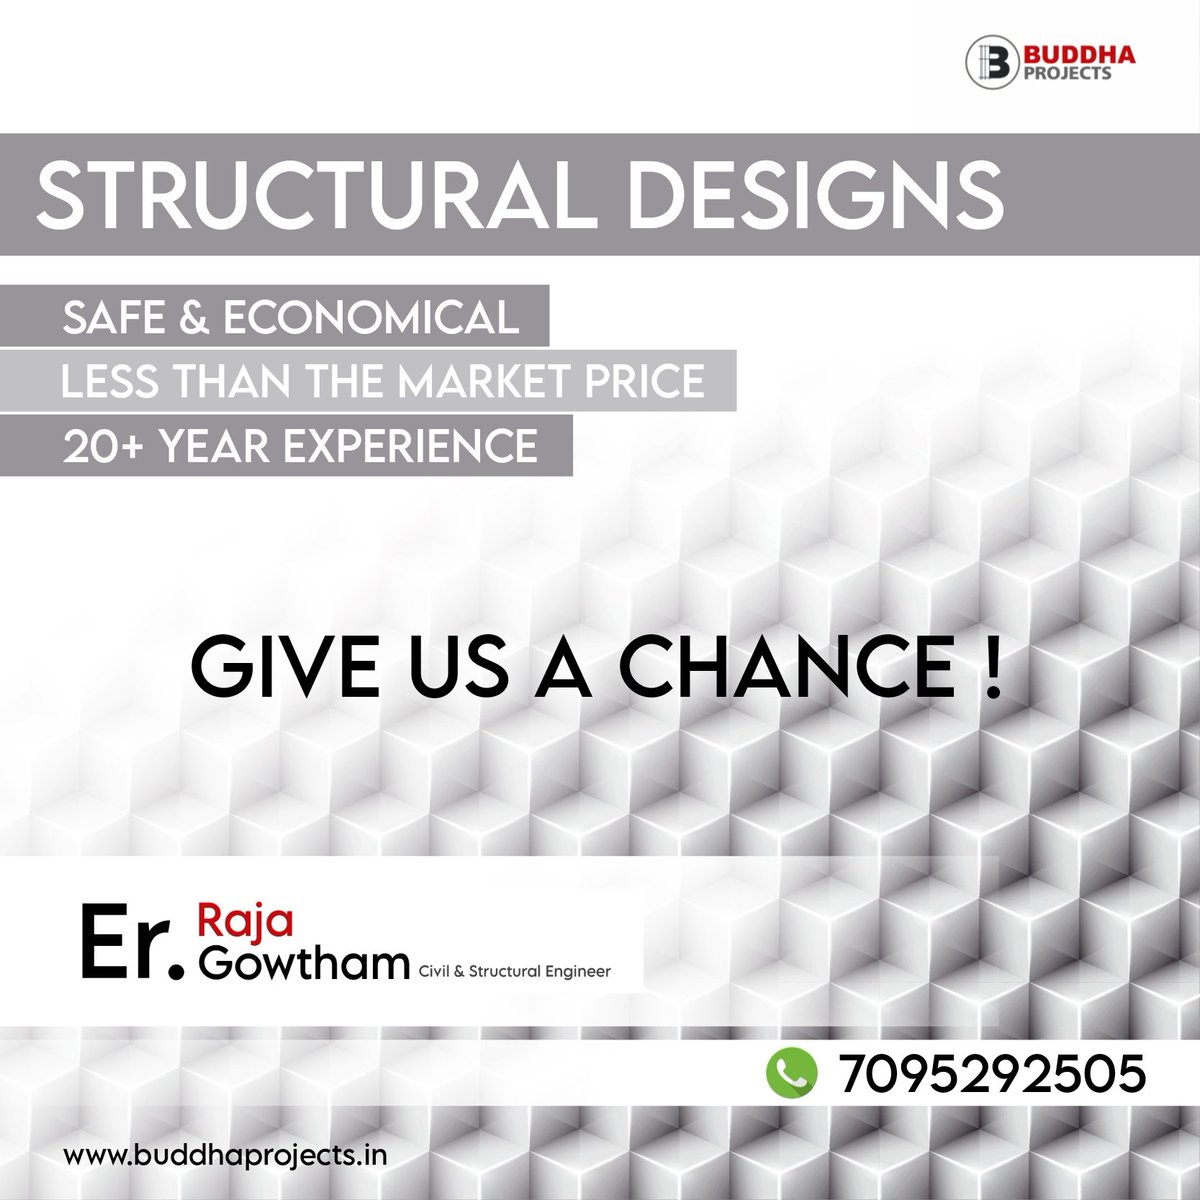 Give us a chance !
Providing structural designs for all types of constructions.

Contact : Er. Raja Gowtham
                  7095292505
#buddhaprojects #rajagowtham #Hyderabad #structuraldesigns #Construction #archi